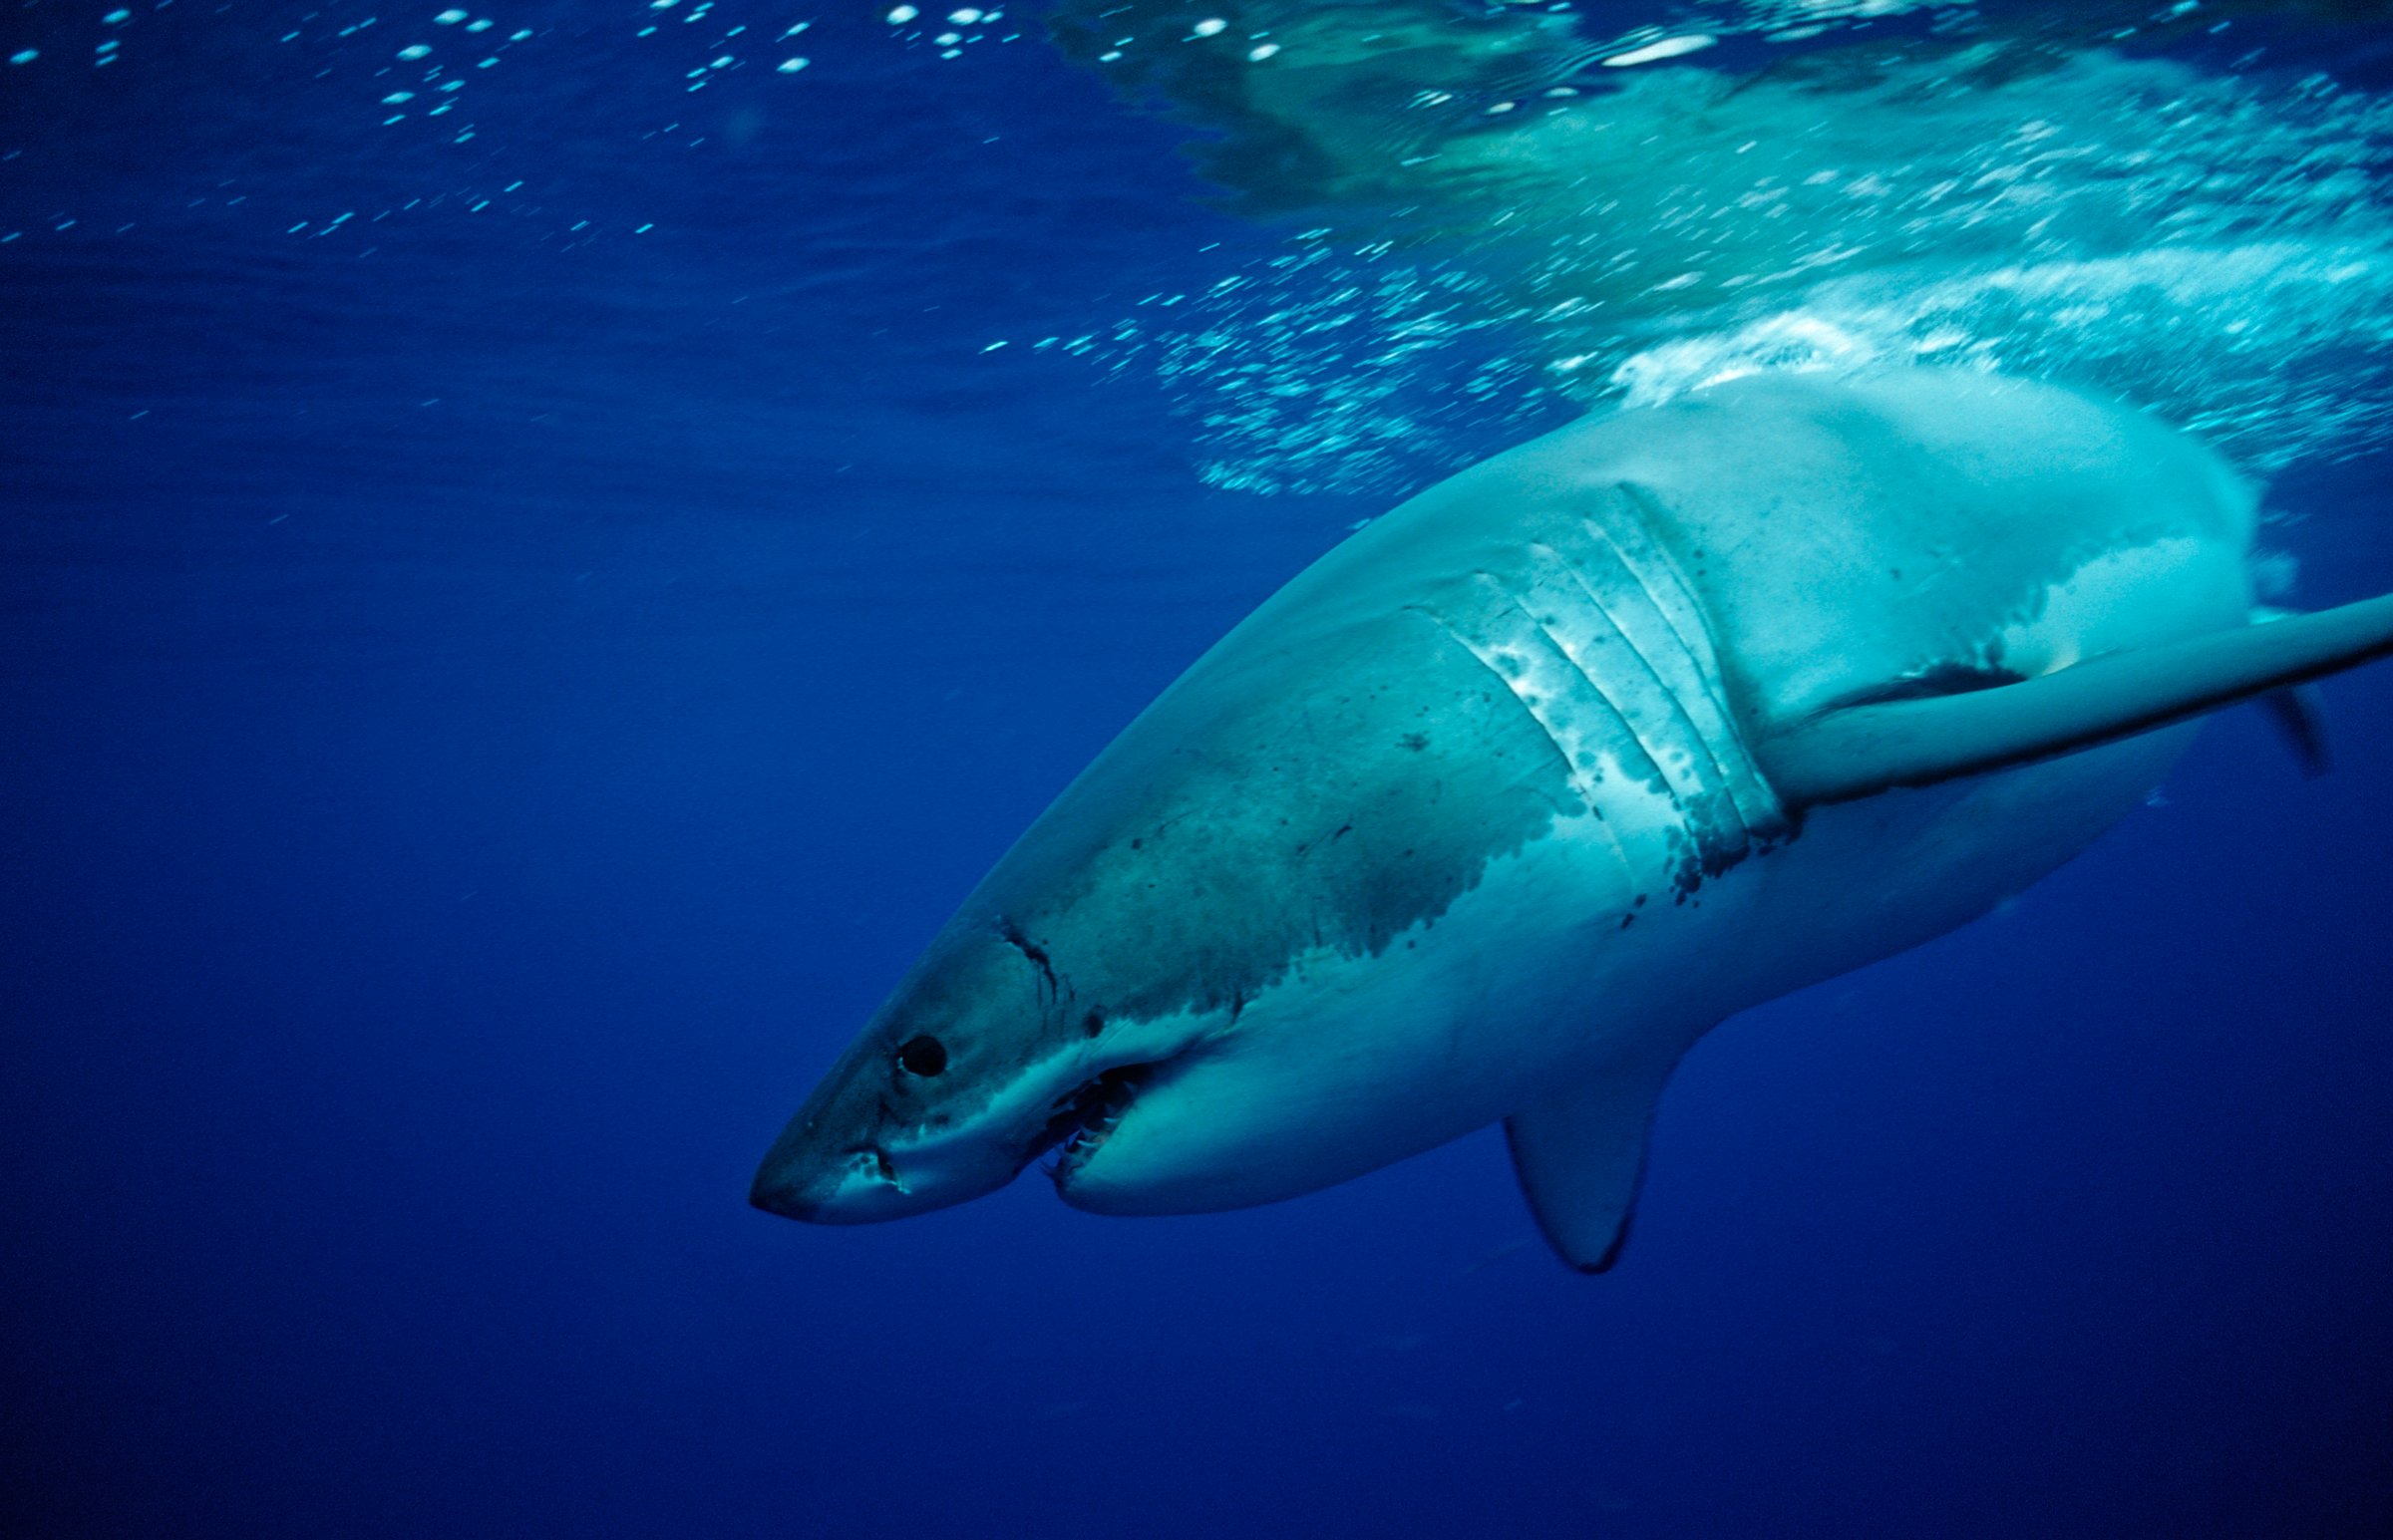 Great White Shark, Carcharodon carcharias, Mexico, Pacific ocean, Guadalupe